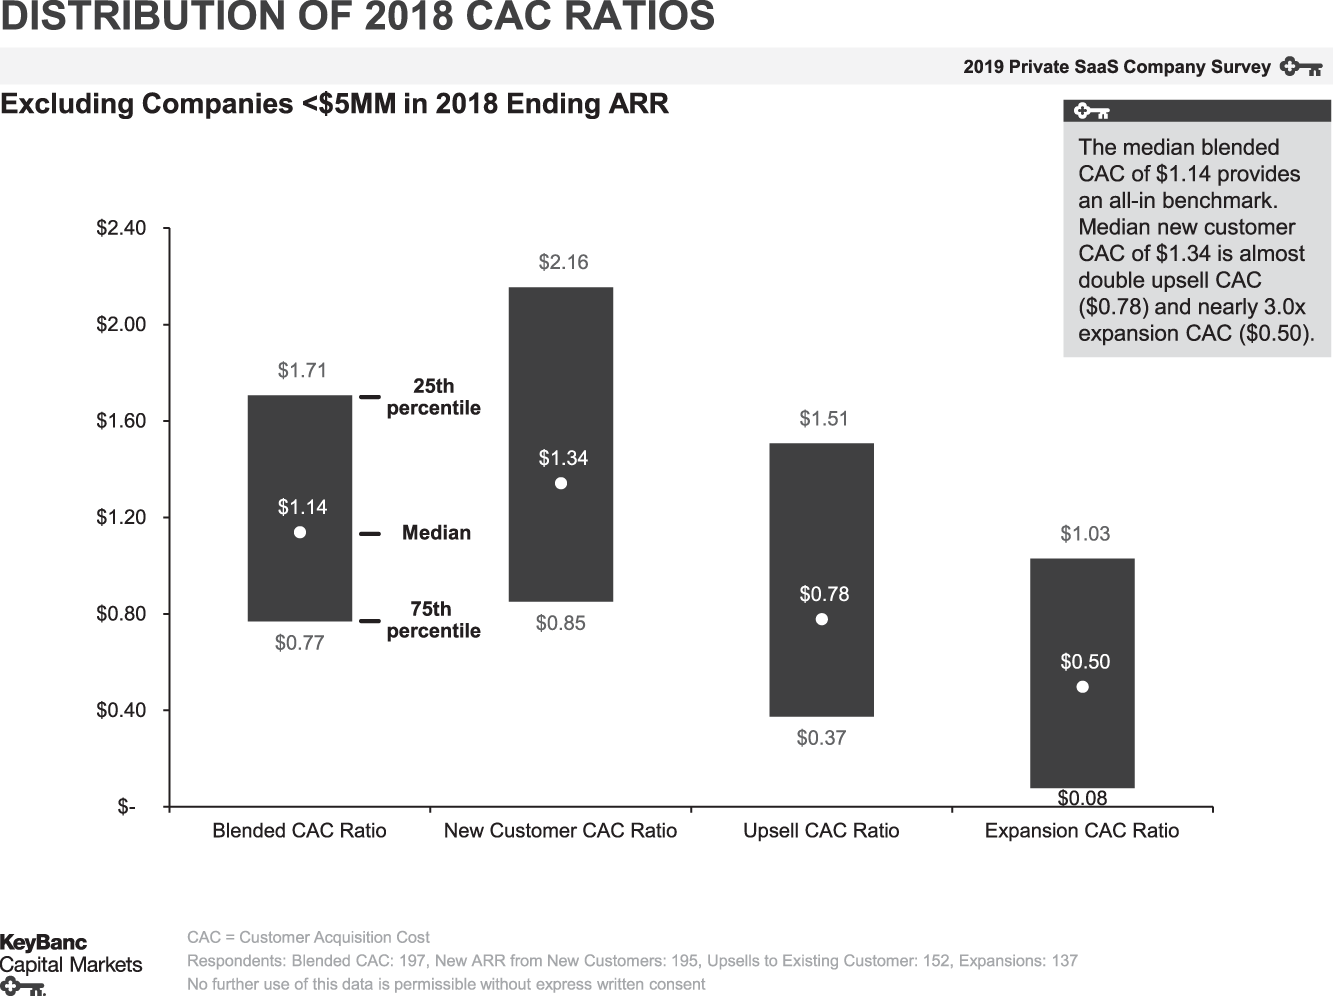 Graph depicting the distribution of 2018 CAC ratios (cost of expansion revenue): Blended, New Customer, Upsell, and Expansion CAC ratios.